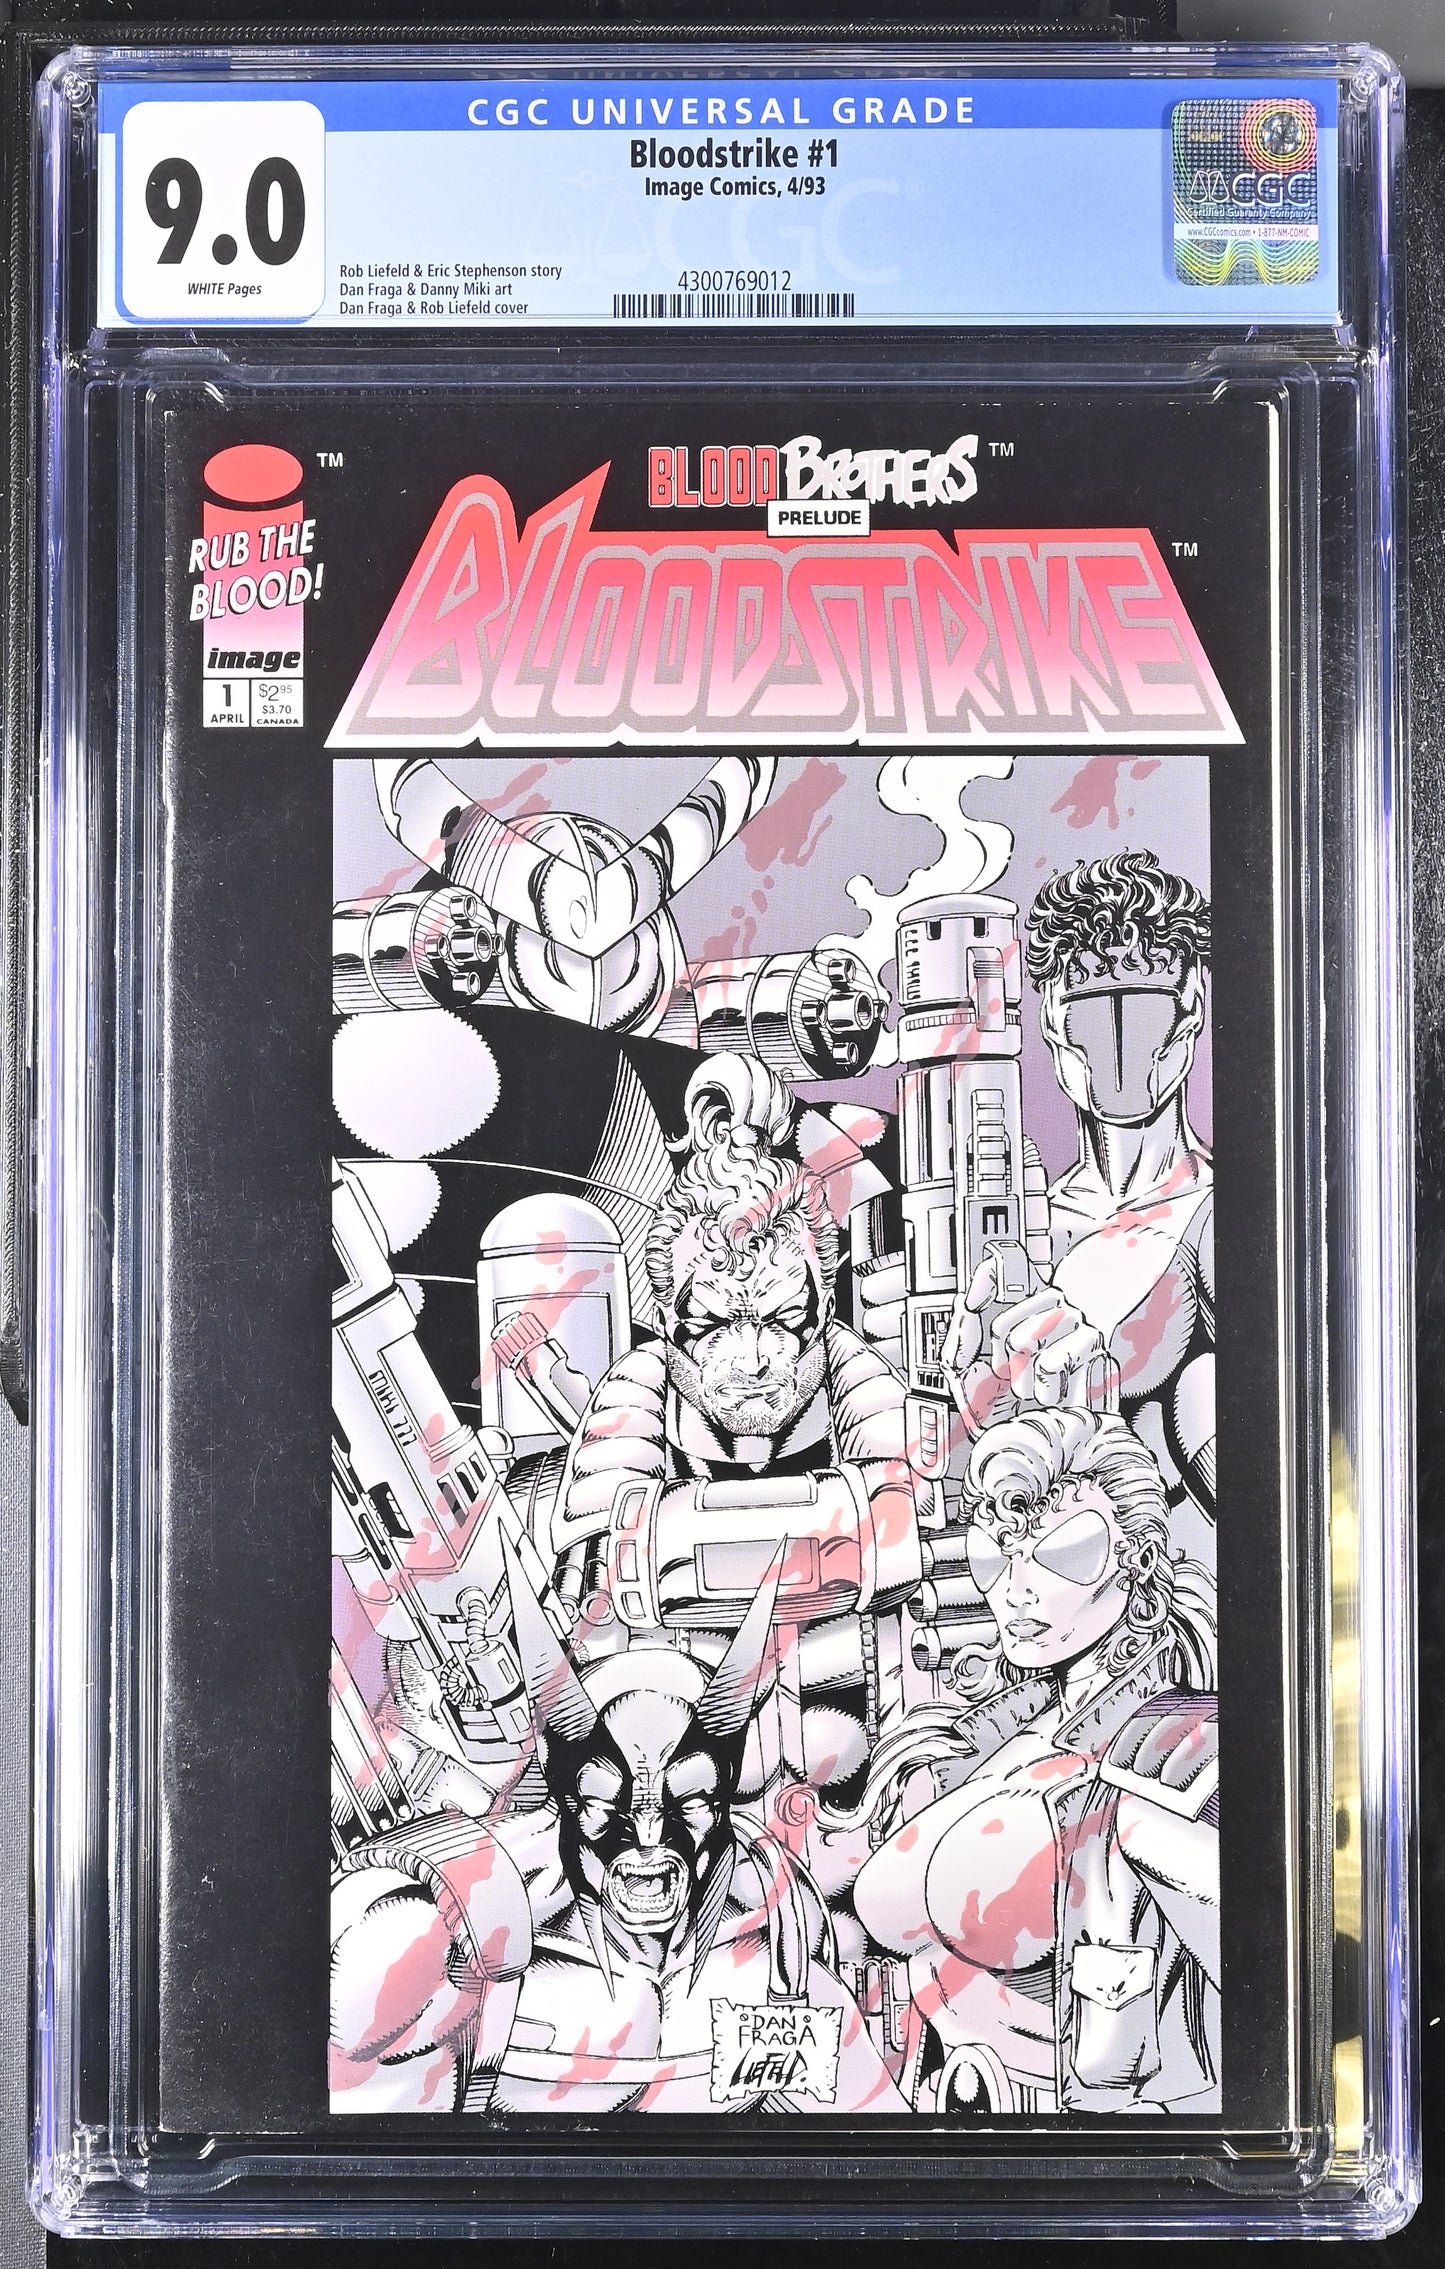 Bloodstrike #1 4/93 Image Comics CGC 9.0 White Pages